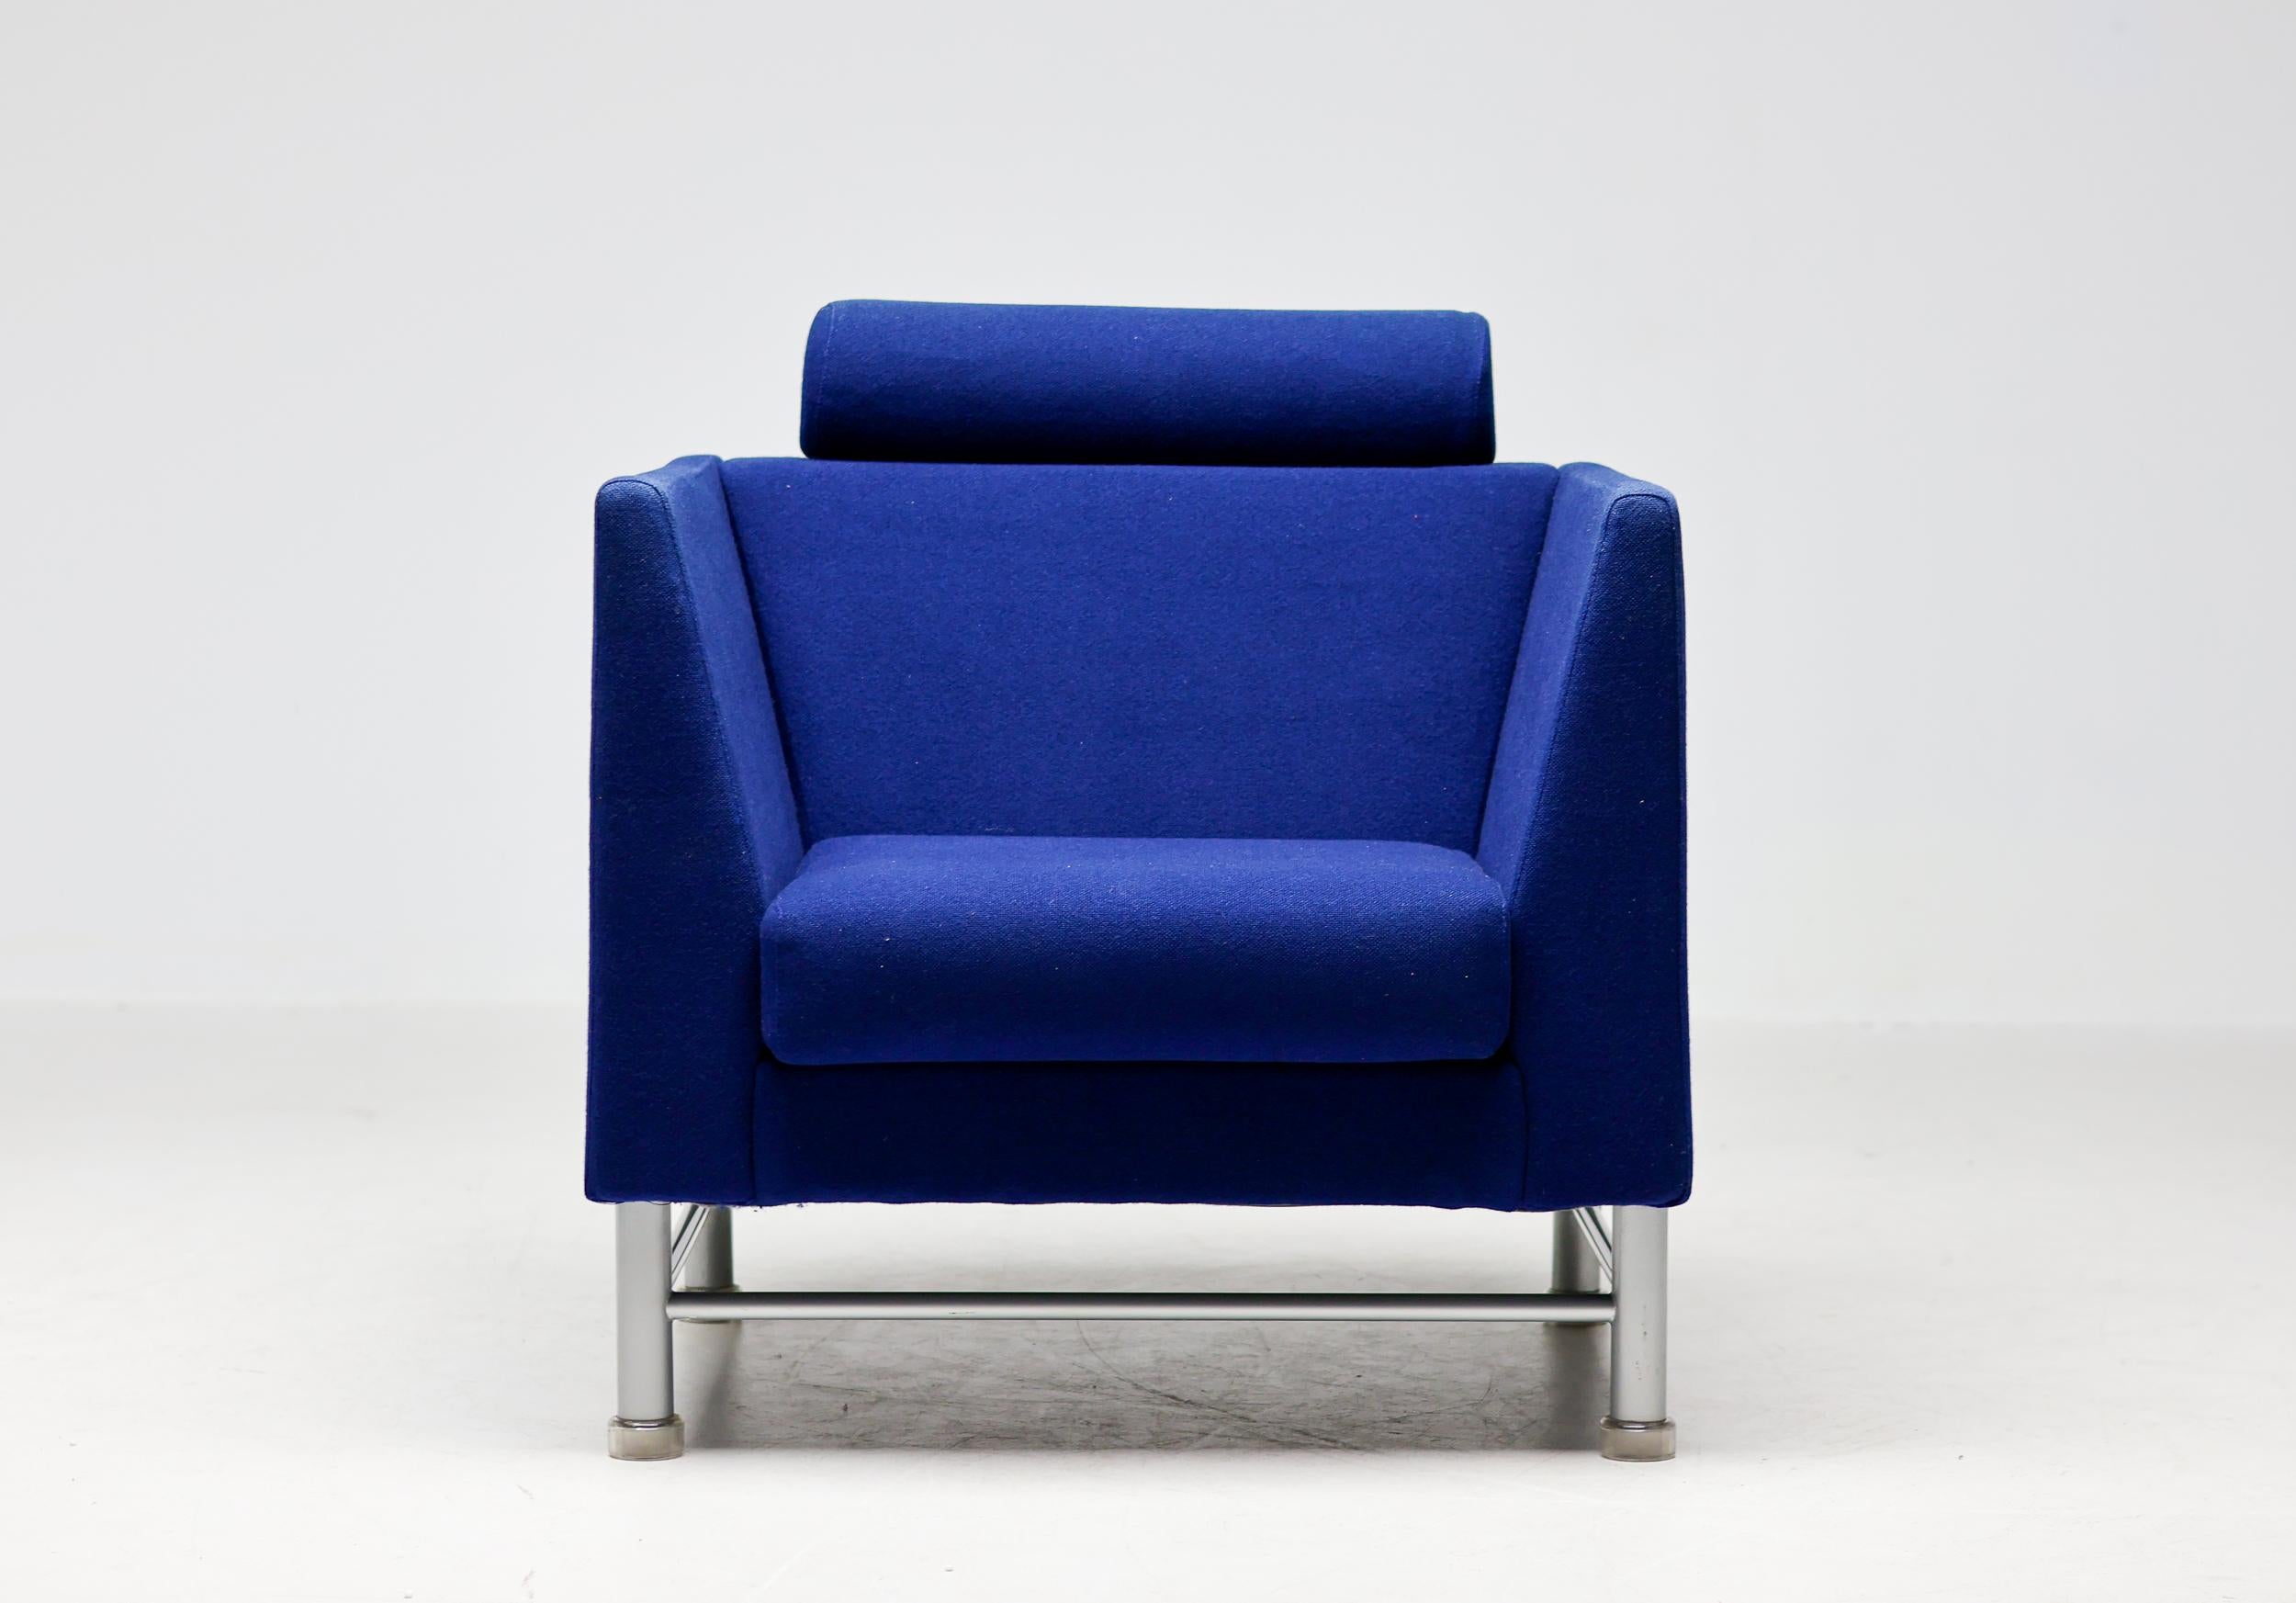 Iconic East Side arm chair in Royal Blue designed by Ettore Sottsass for Knoll International in 1983.
Postmodern chair with original upholstery in wonderful vintage condition.
The chair features a gray enameled steel base with translucent plastic